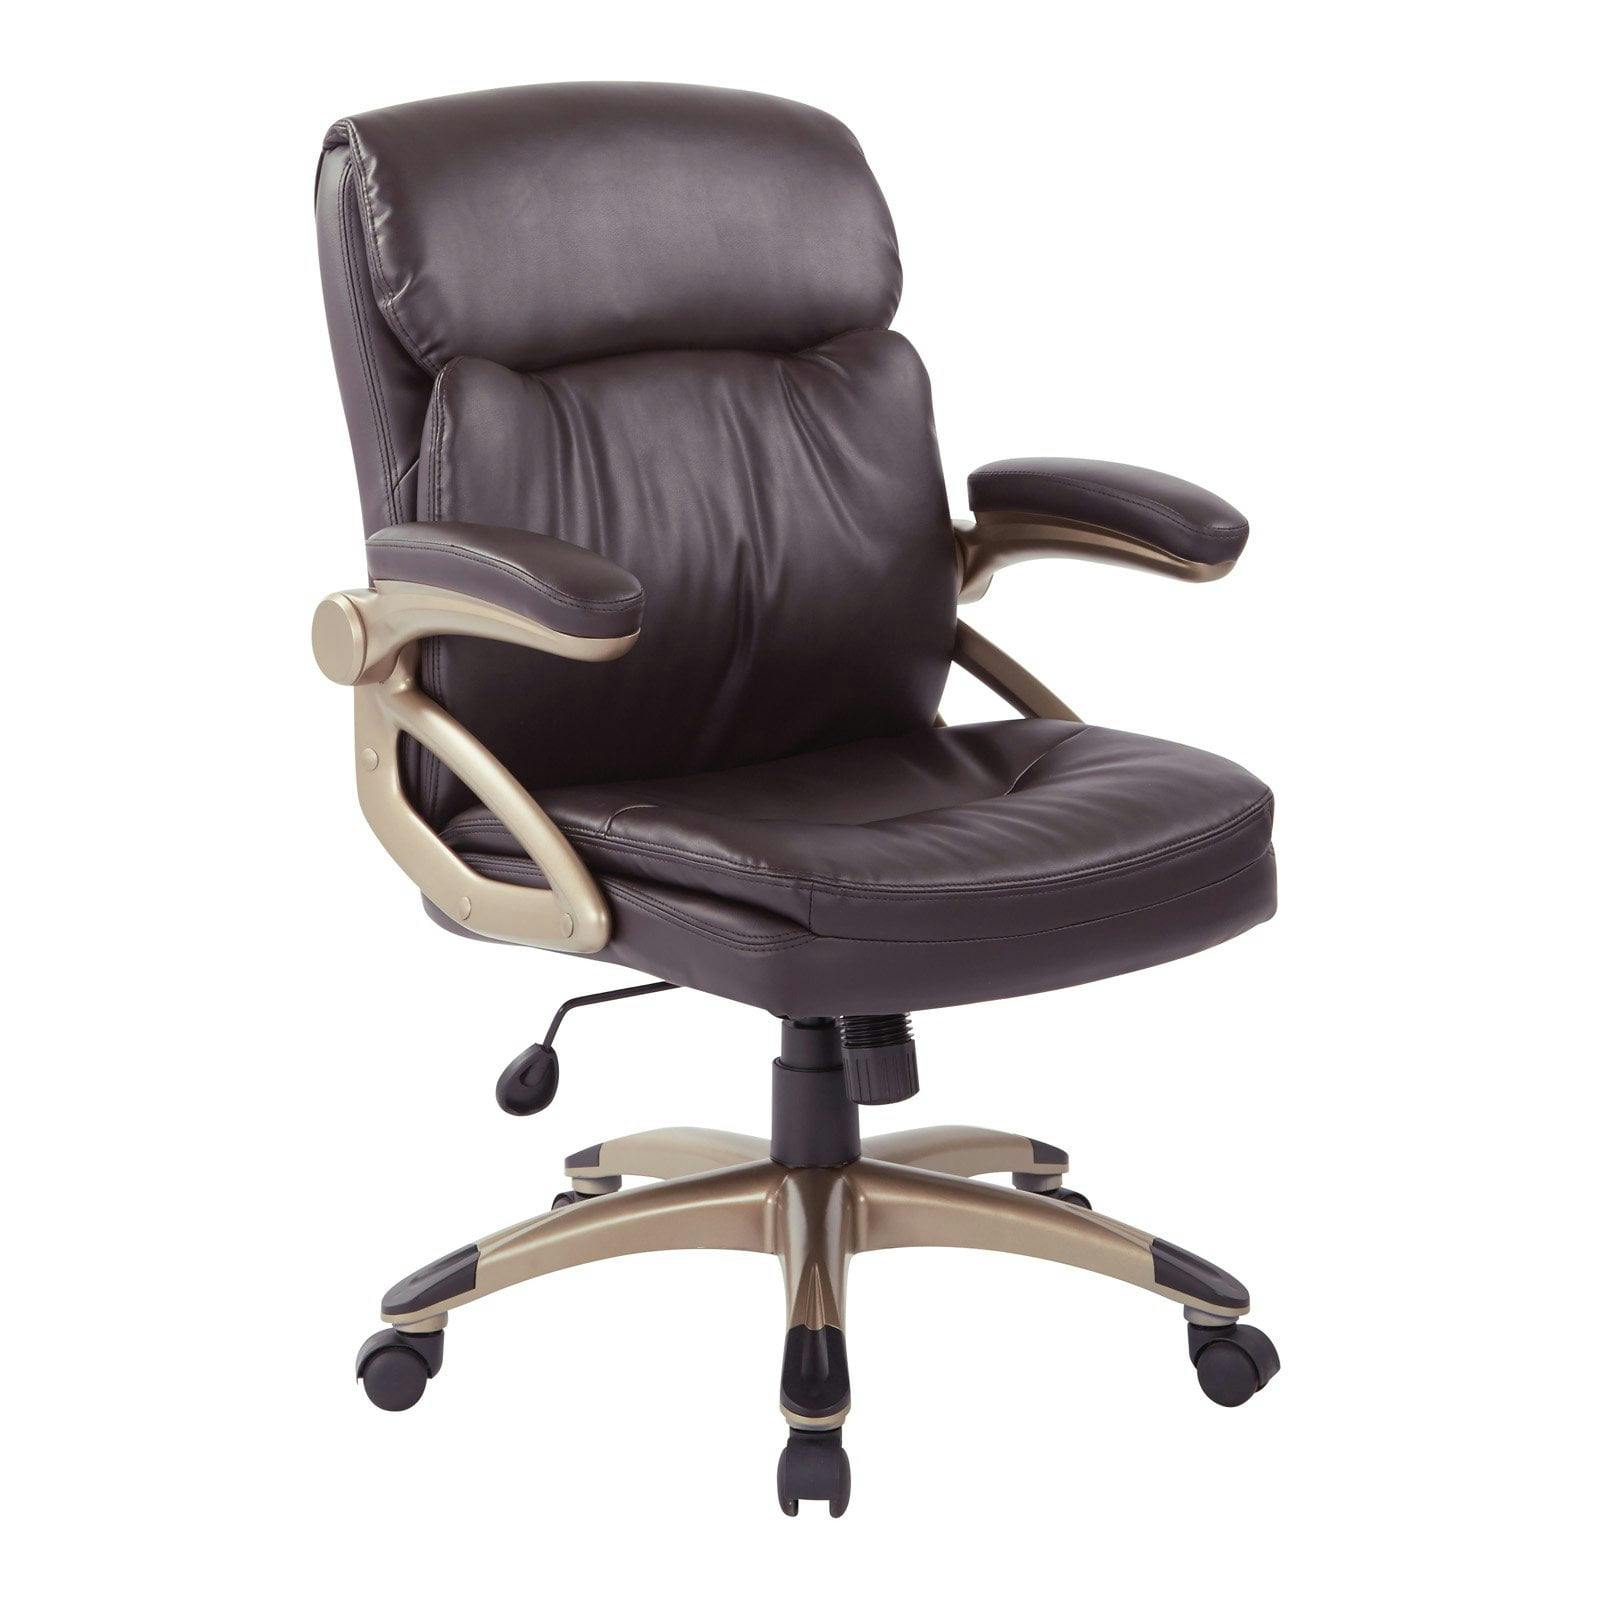 Espresso Bonded Leather Executive Chair with Adjustable Arms